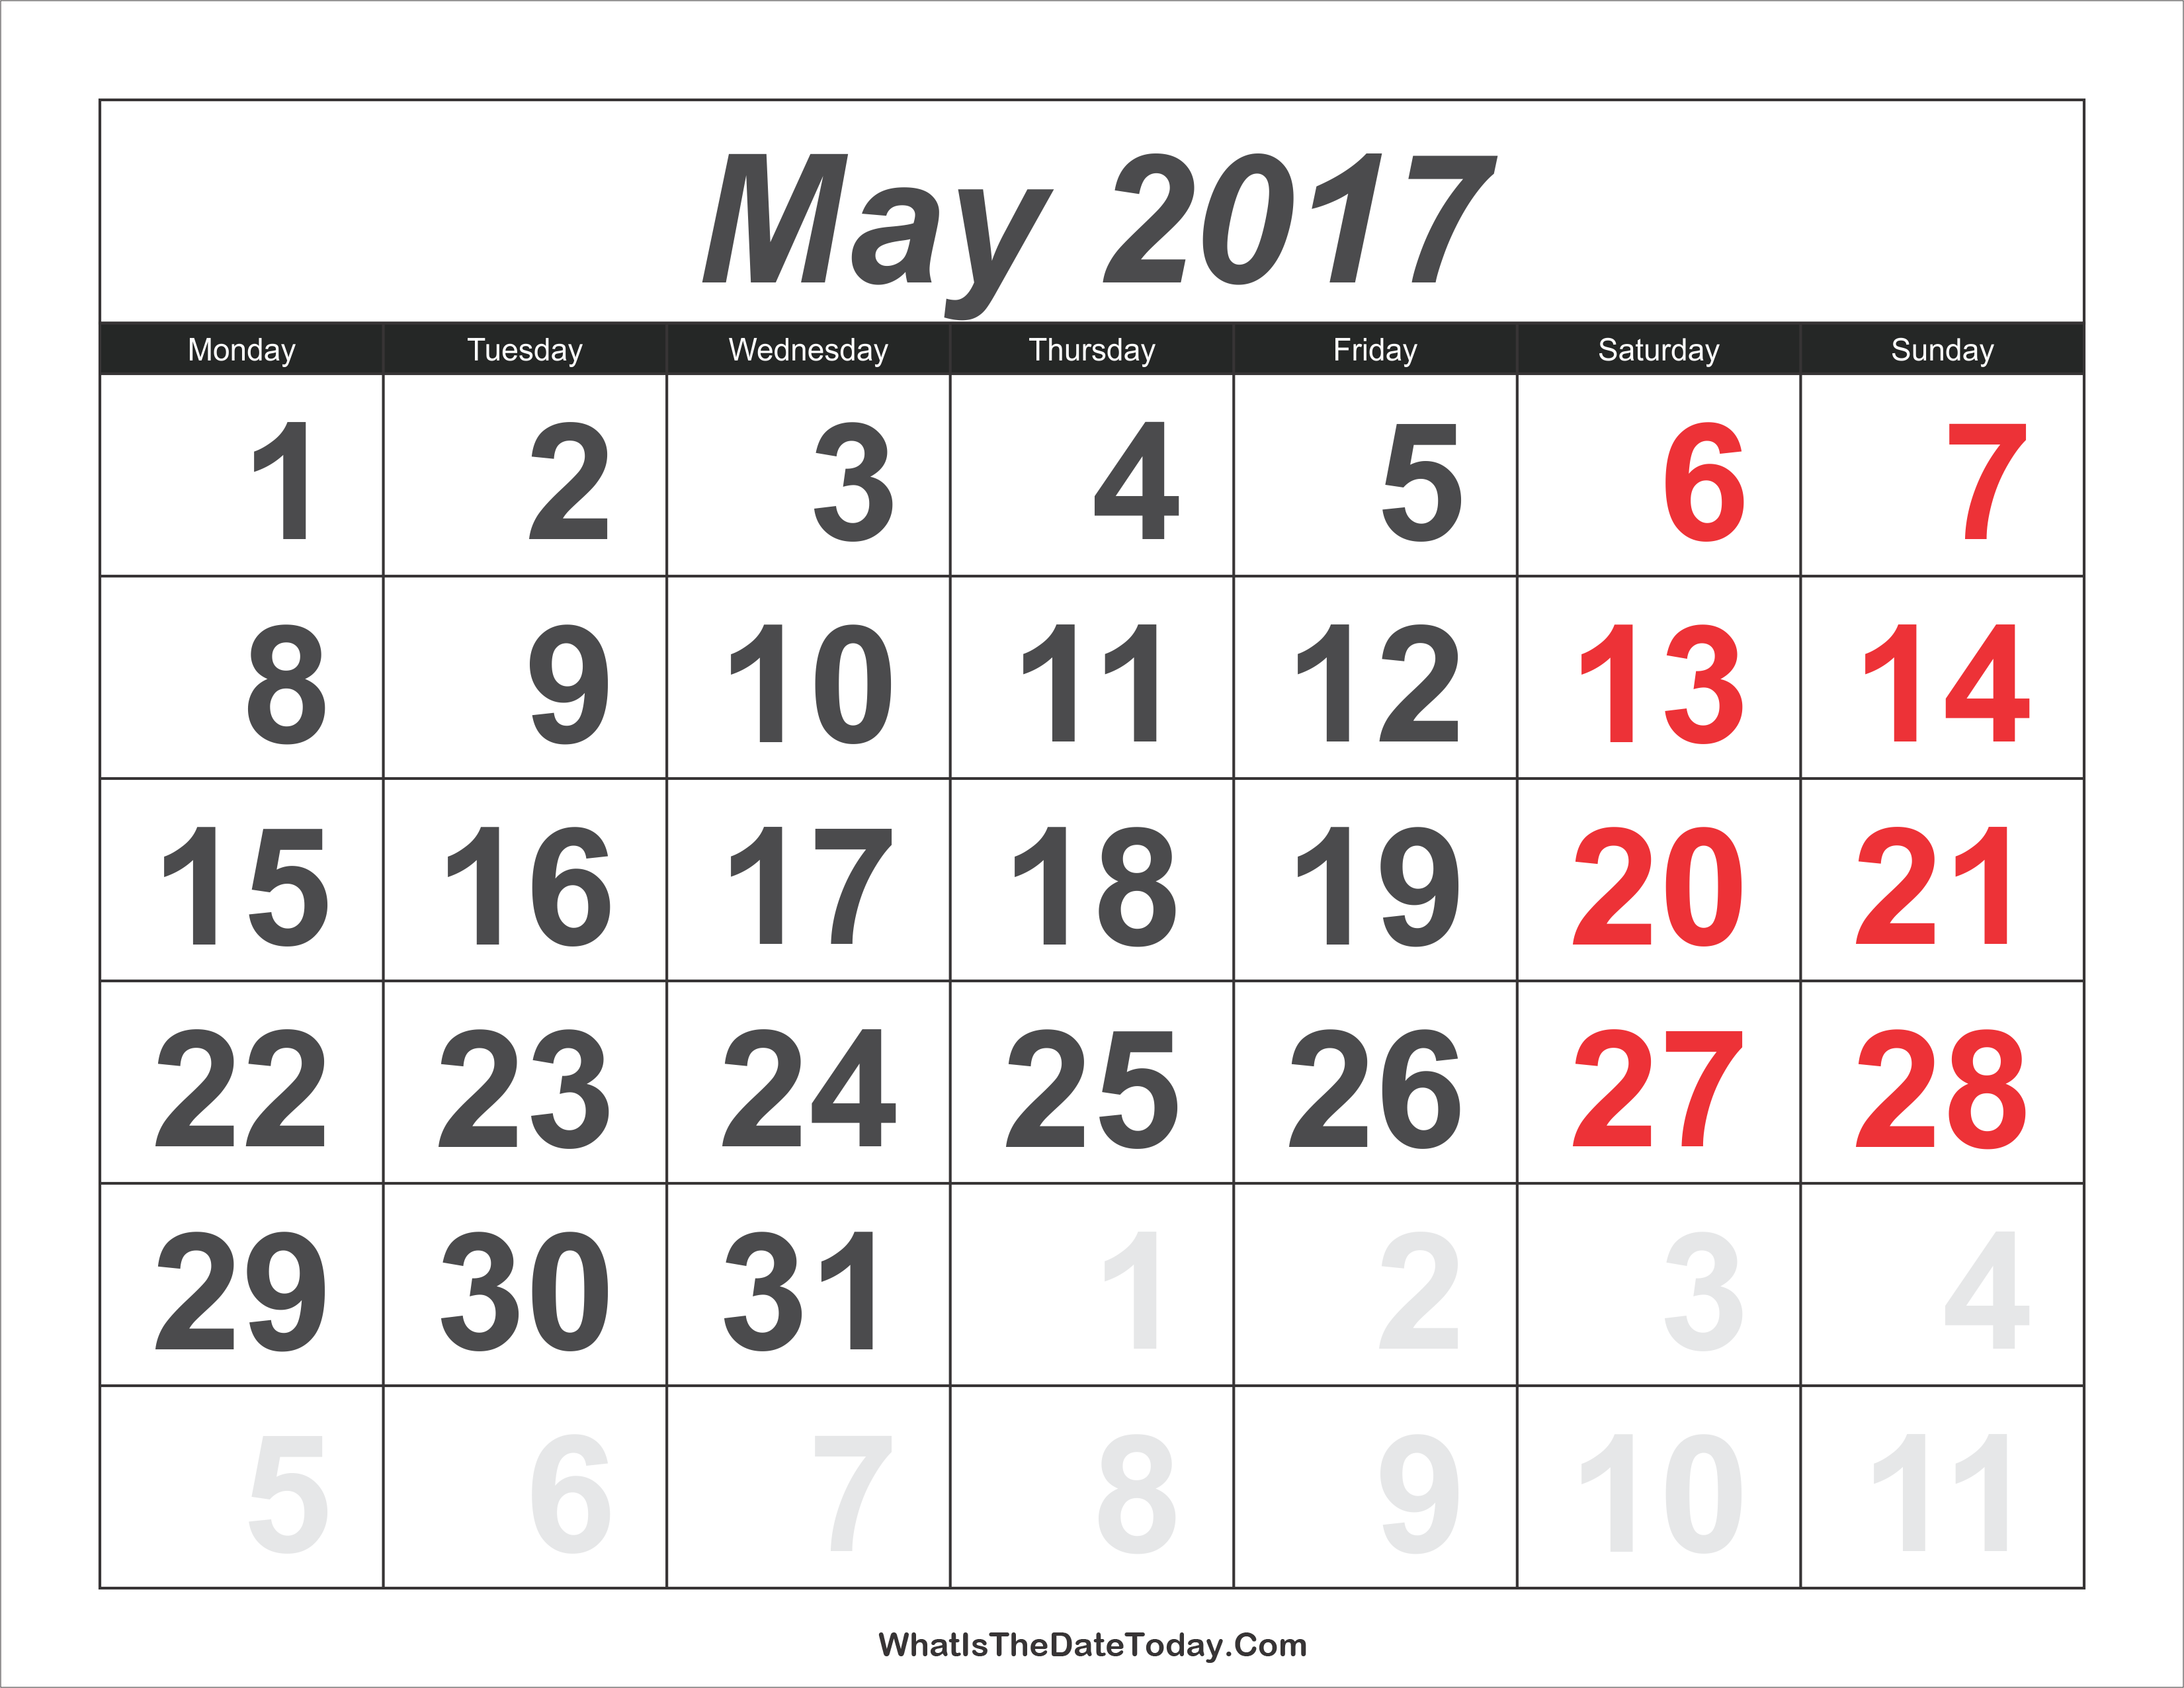 2017 Calendar May with Large Numbers | Whatisthedatetoday.Com